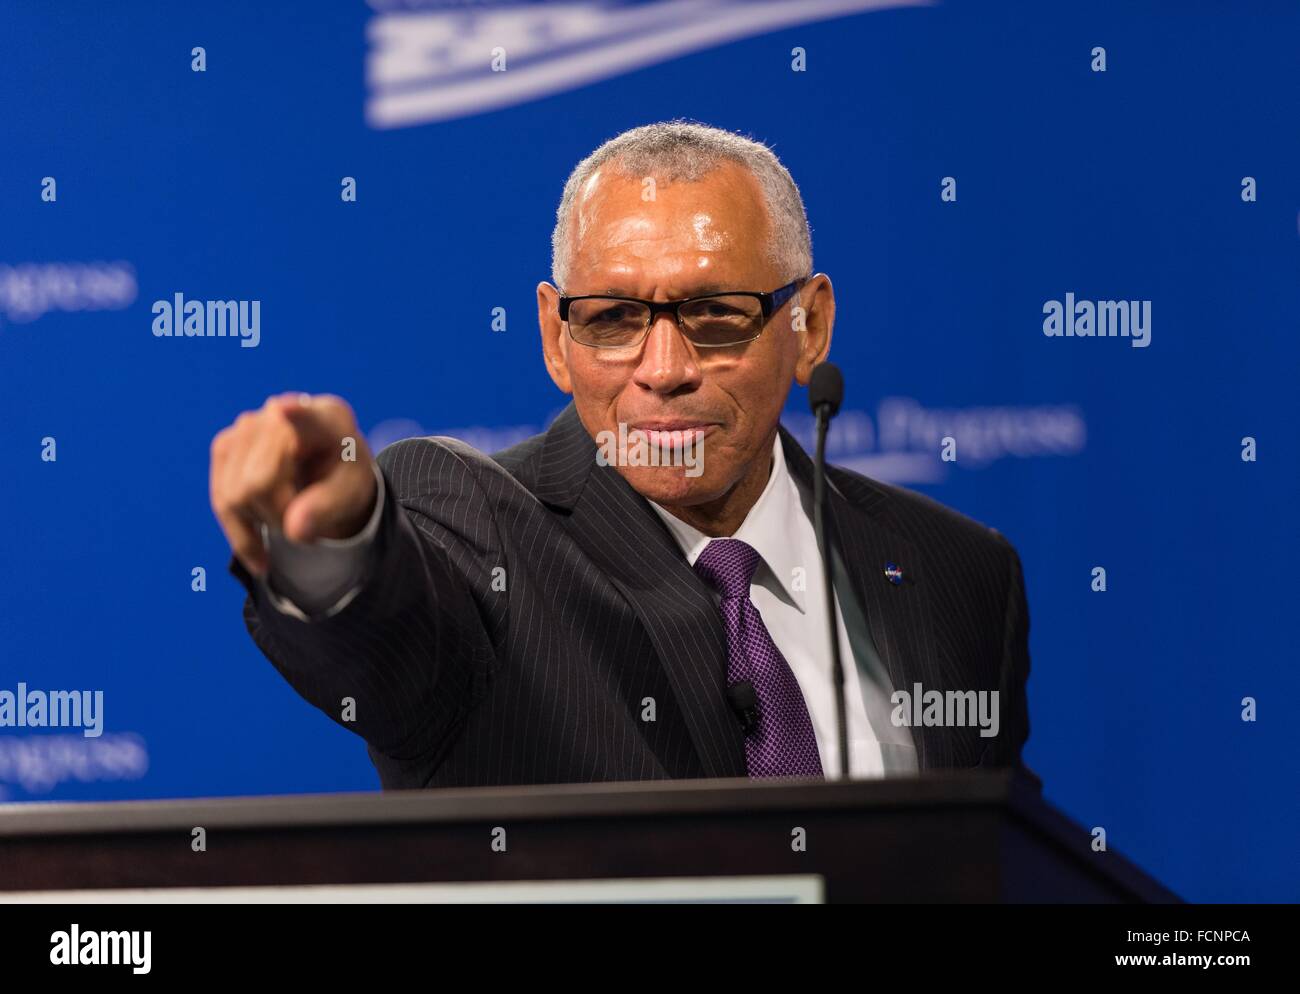 NASA Administrator Charles Bolden during his keynote address at the Human Space Exploration: The Next Steps event at The Center for American Progress October 28, 2015 in Washington, D.C. Stock Photo